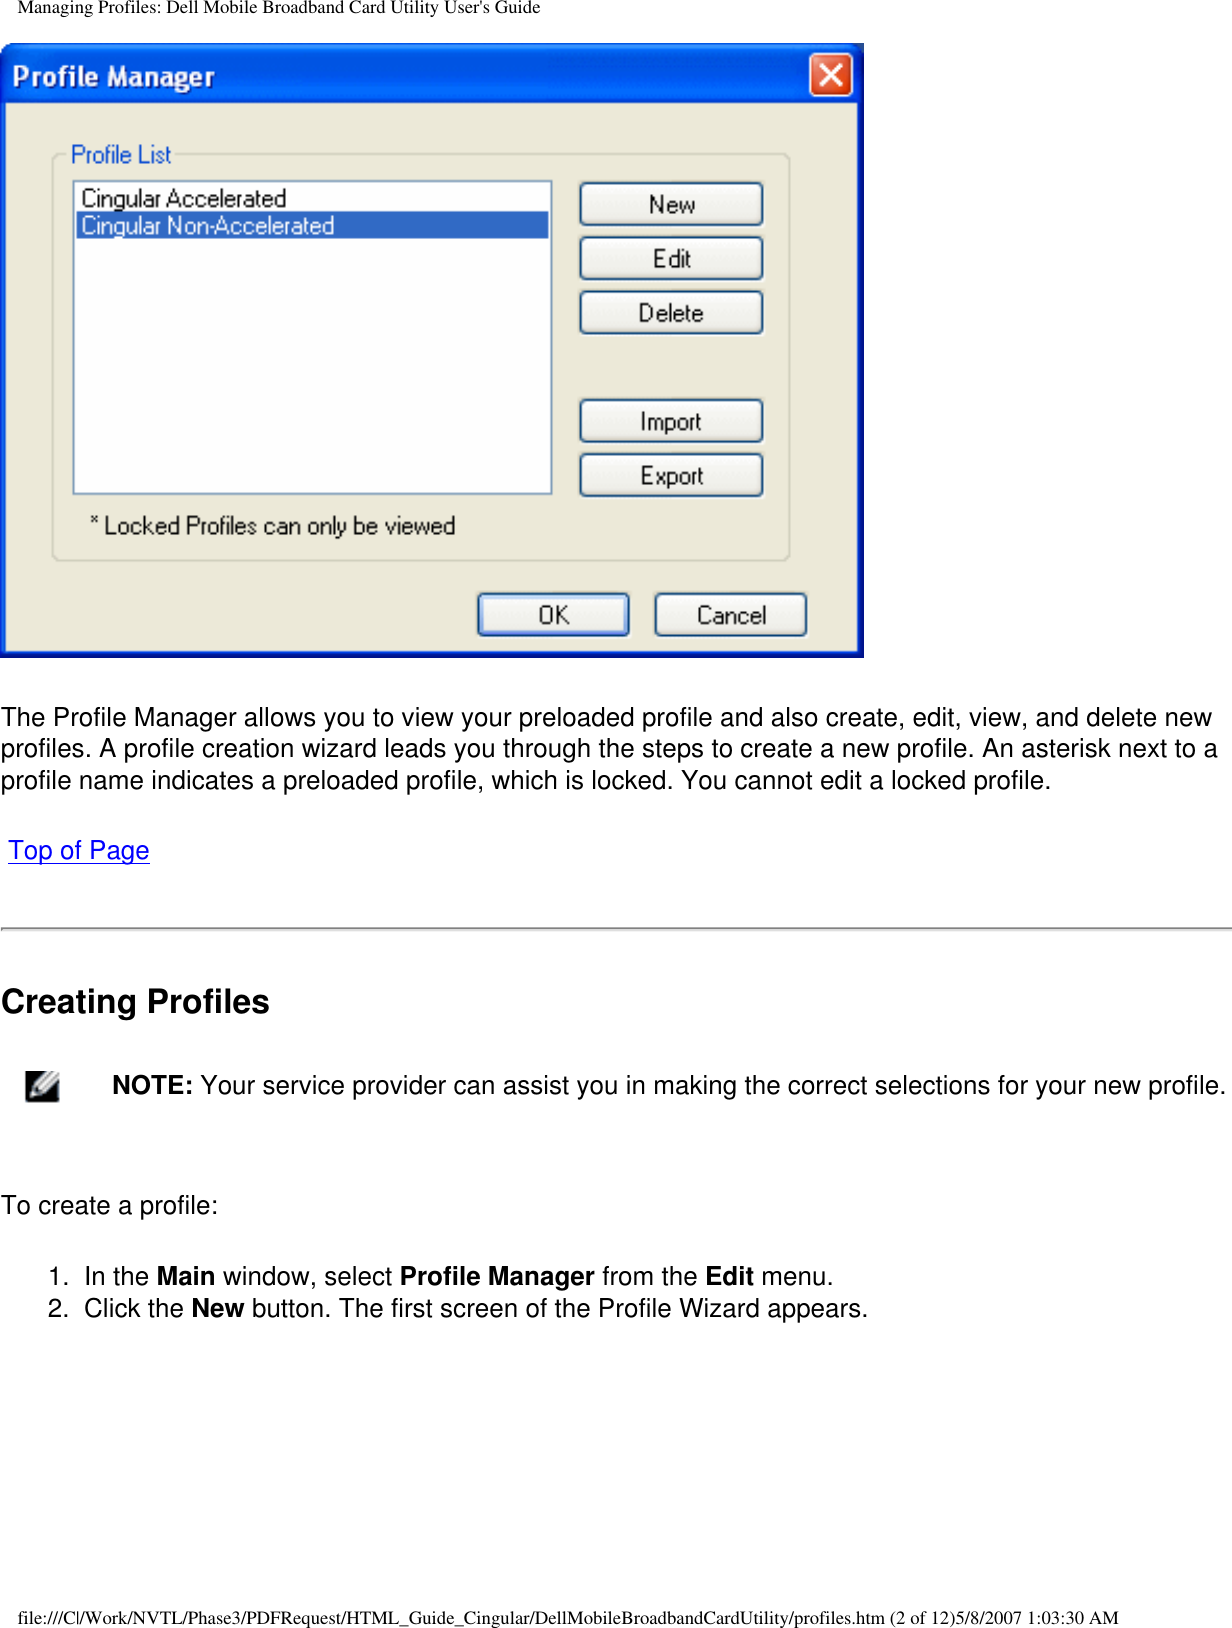 Managing Profiles: Dell Mobile Broadband Card Utility User&apos;s Guide The Profile Manager allows you to view your preloaded profile and also create, edit, view, and delete new profiles. A profile creation wizard leads you through the steps to create a new profile. An asterisk next to a profile name indicates a preloaded profile, which is locked. You cannot edit a locked profile.  Top of PageCreating Profiles    NOTE: Your service provider can assist you in making the correct selections for your new profile.To create a profile:1.  In the Main window, select Profile Manager from the Edit menu.2.  Click the New button. The first screen of the Profile Wizard appears.file:///C|/Work/NVTL/Phase3/PDFRequest/HTML_Guide_Cingular/DellMobileBroadbandCardUtility/profiles.htm (2 of 12)5/8/2007 1:03:30 AM